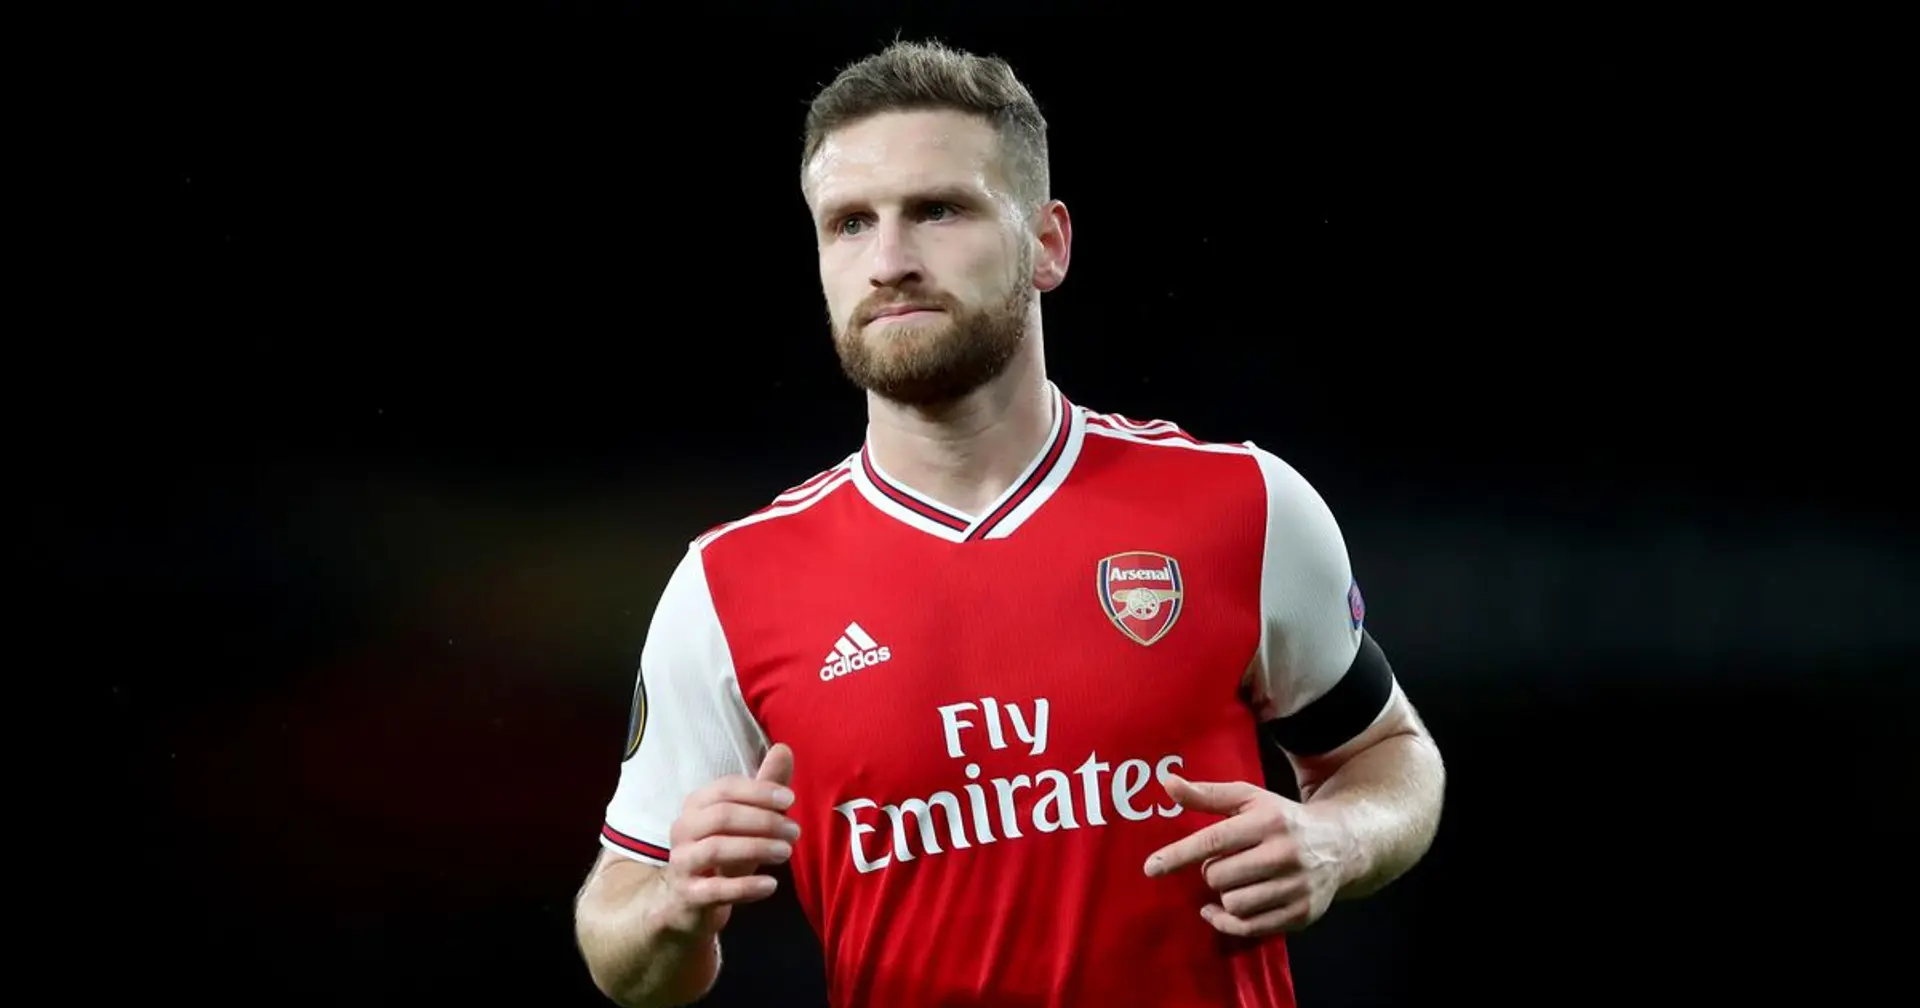 'He's another player who's ready to leave the club': Fabrizio Romano on Shkodran Mustafi